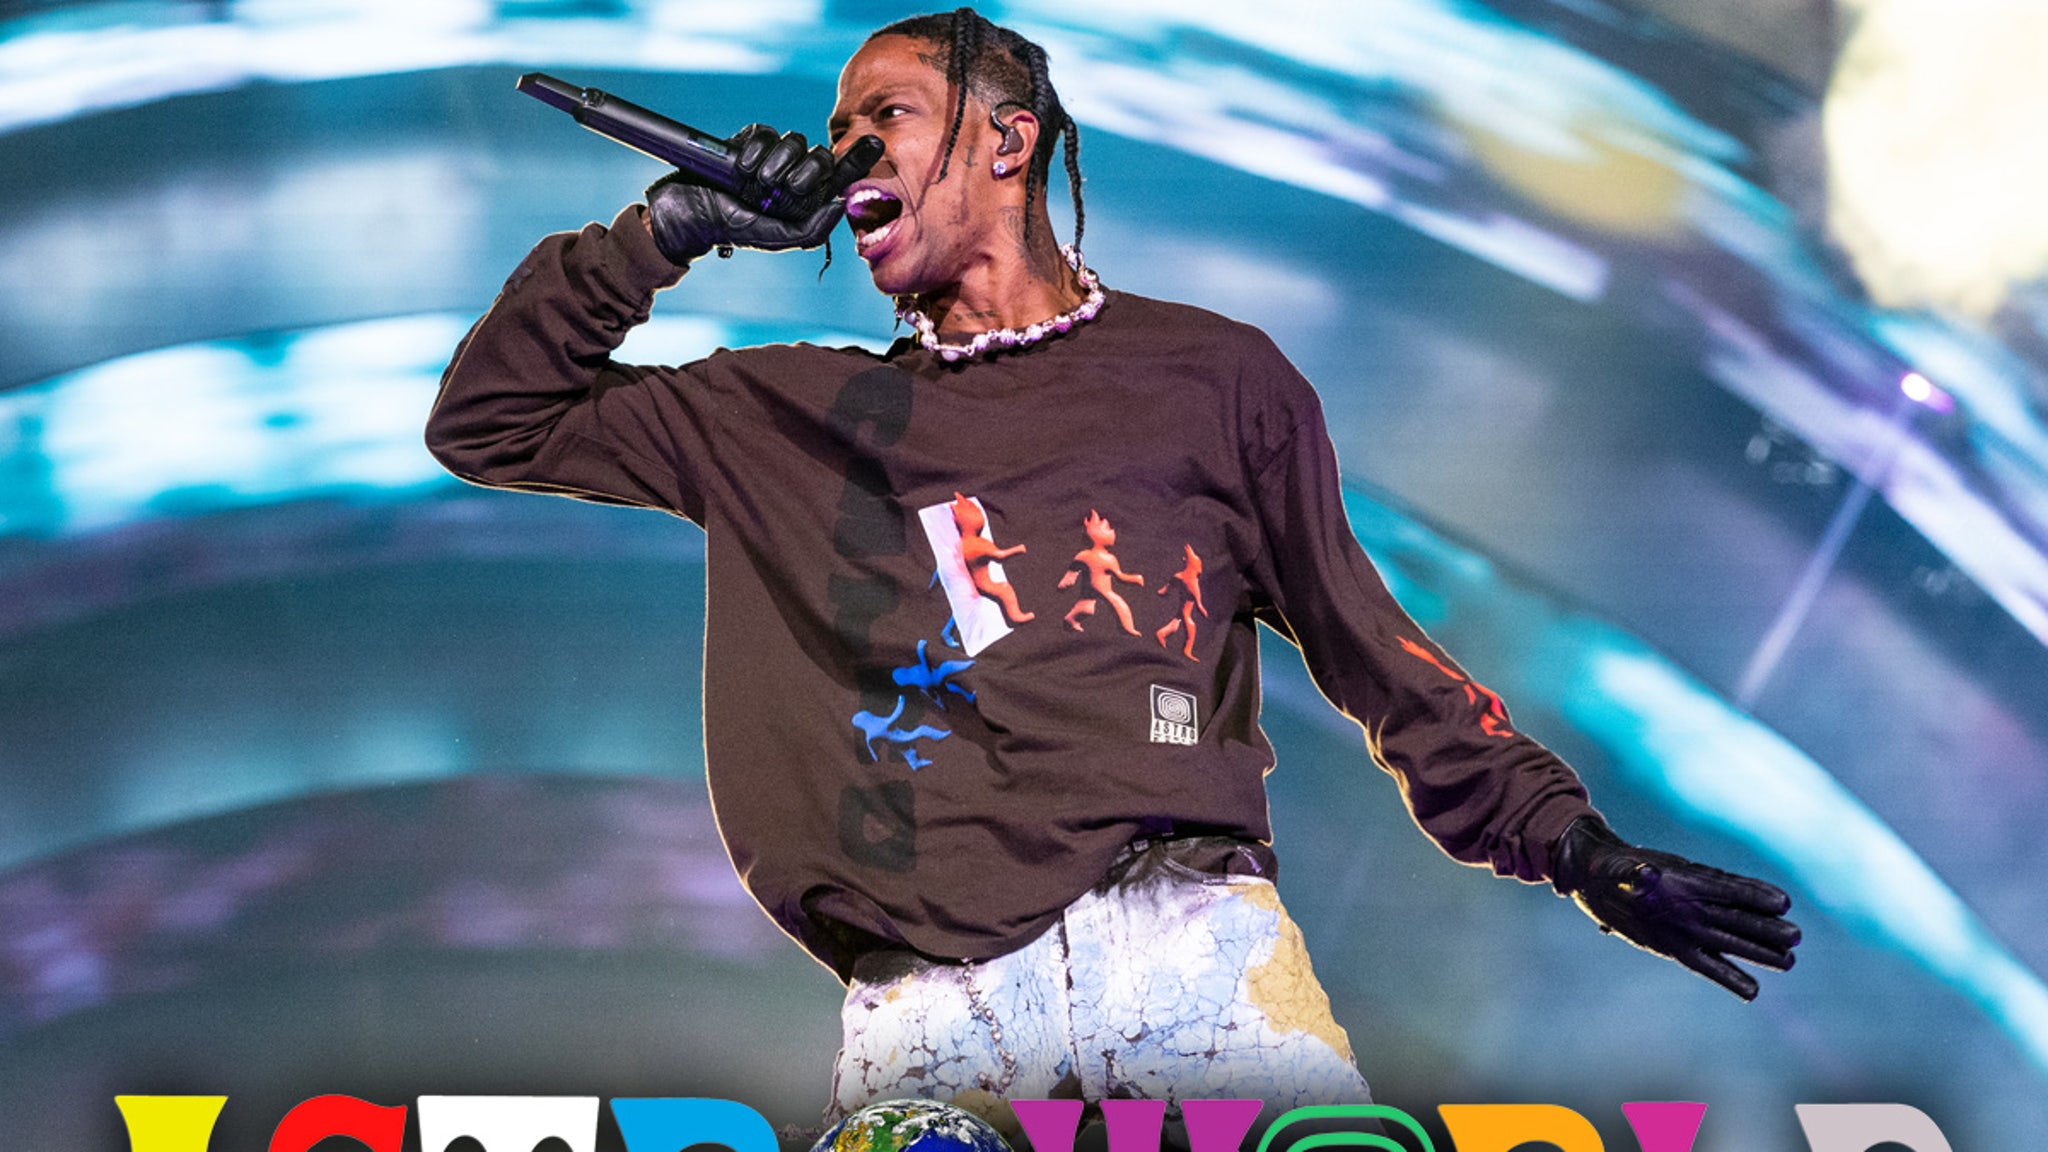 Astroworld Venue's Liability Insurance Policy Totals $26 Million to Cover Lawsuits